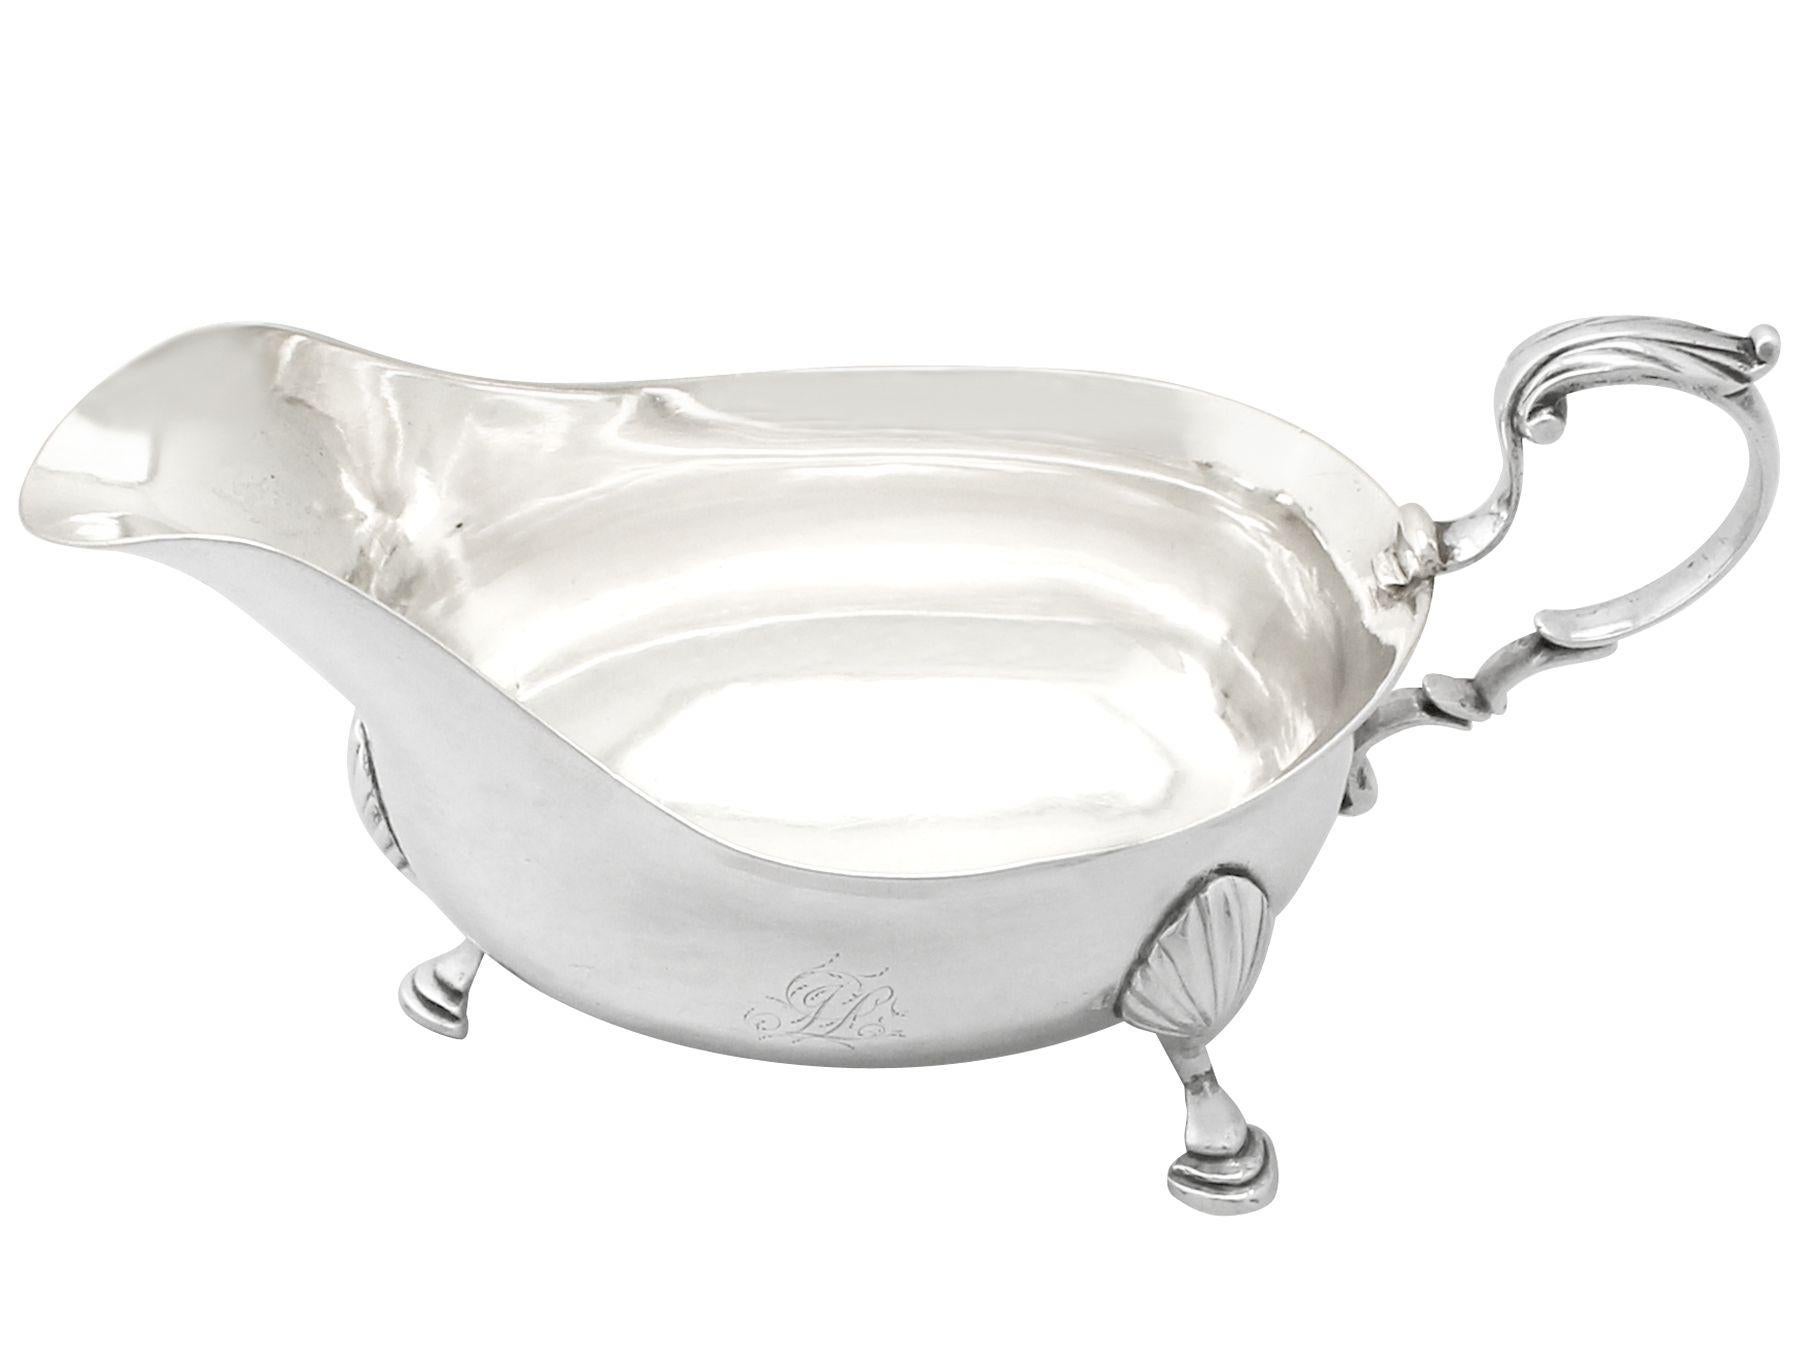 A fine and impressive antique Georgian Newcastle sterling silver sauce boat made by John Langlands I & John Robertson I, an addition to our silver dining collection.

This exceptional antique Georgian sterling silver sauce boat has a plain oval